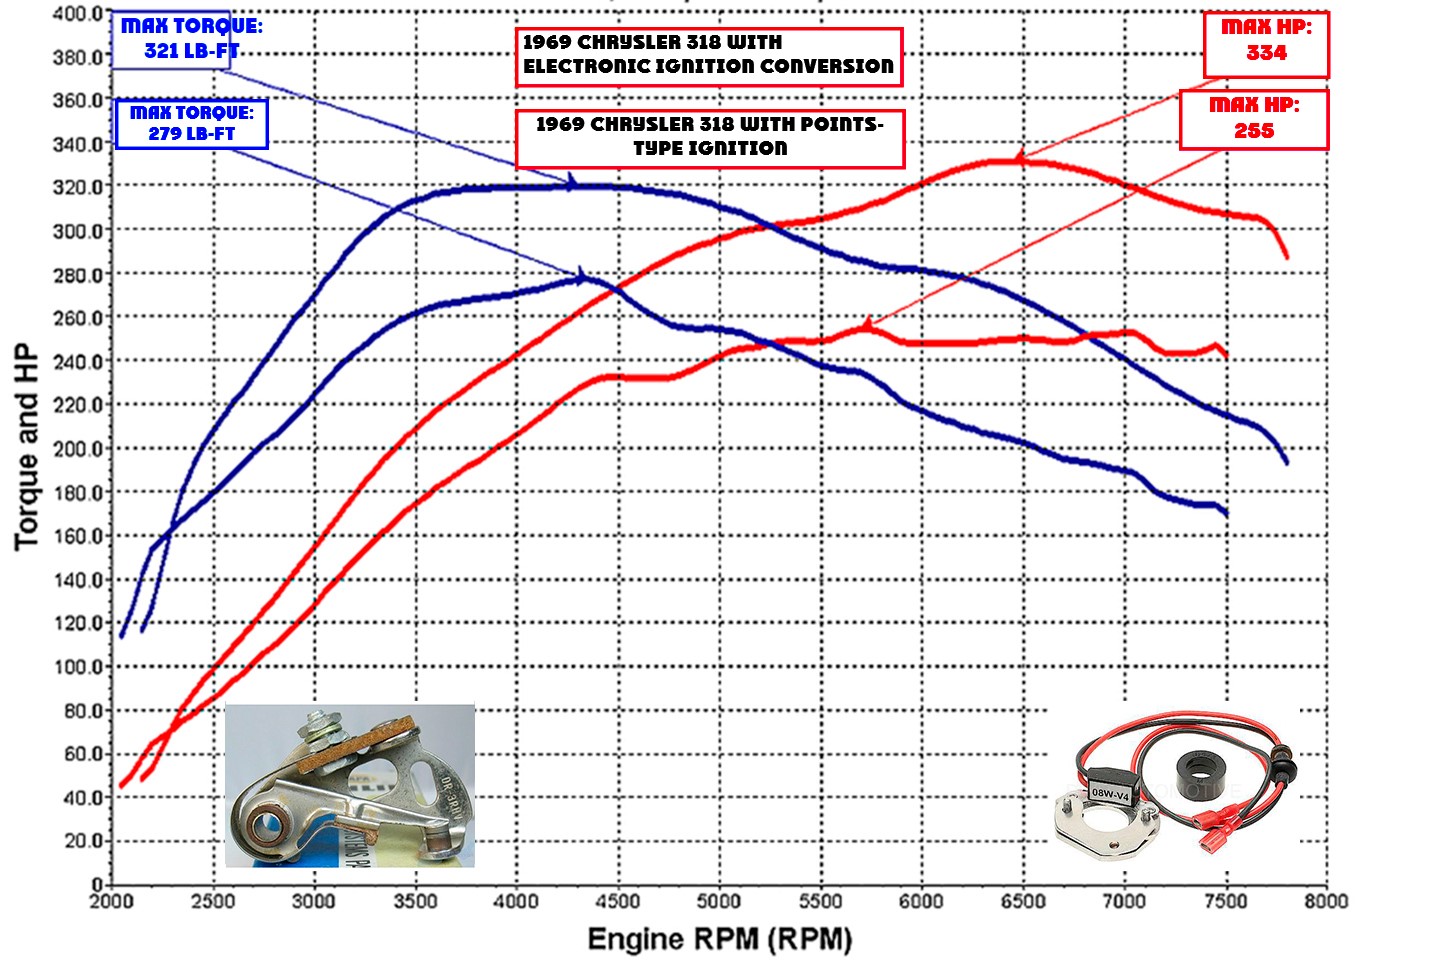 points-type ignition compared to electronic ignition